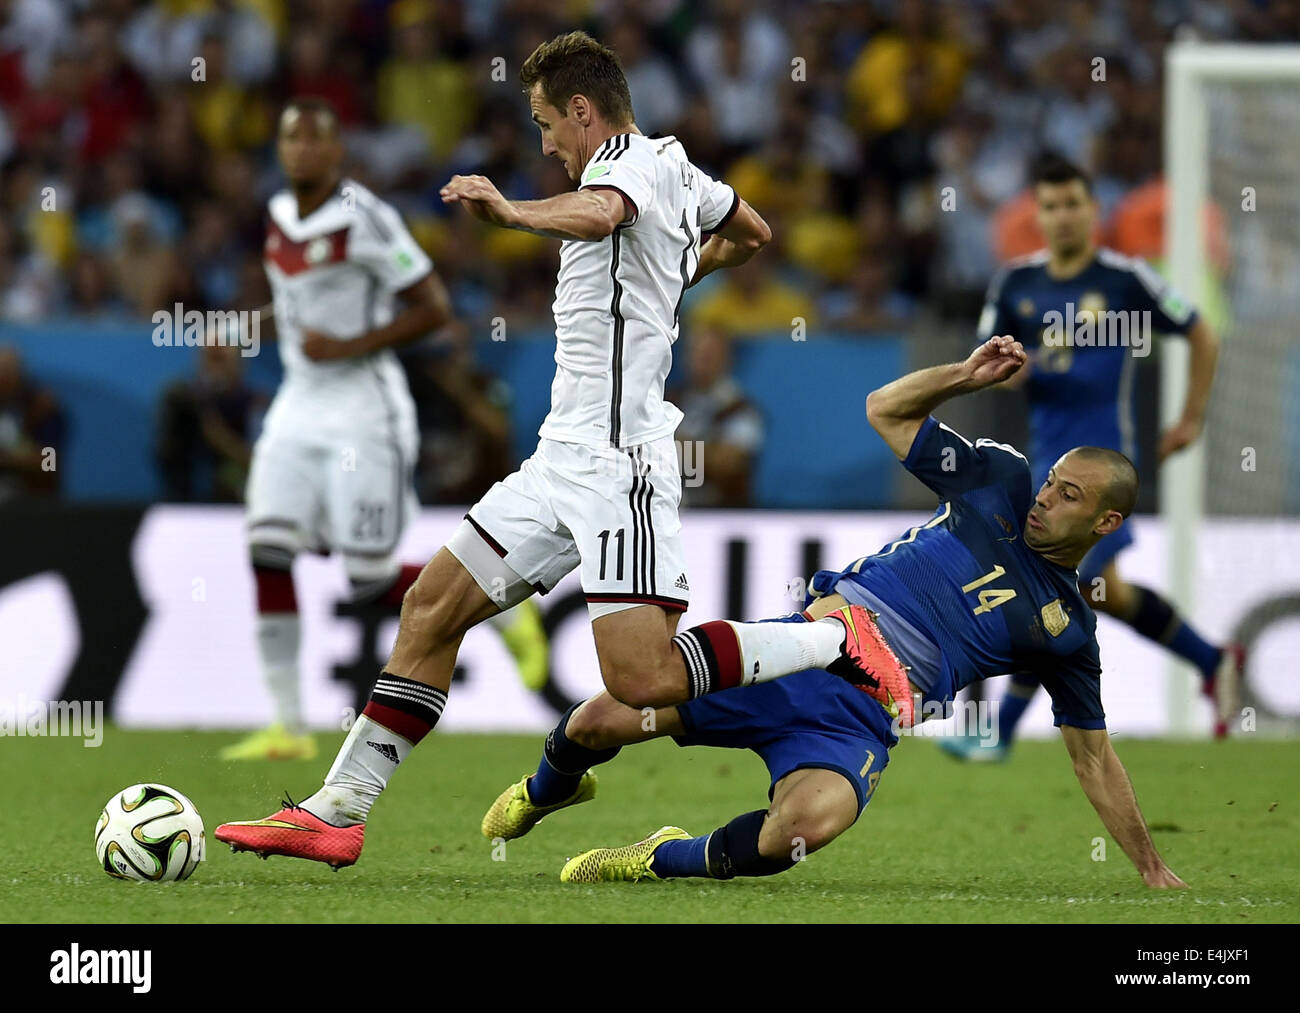 Rio De Janeiro, Brazil. 13th July, 2014. Argentina's Javier Mascherano (R) tackles Germany's Miroslav Klose during the final match between Germany and Argentina of 2014 FIFA World Cup at the Estadio do Maracana Stadium in Rio de Janeiro, Brazil, on July 13, 2014. Credit:  Qi Heng/Xinhua/Alamy Live News Stock Photo